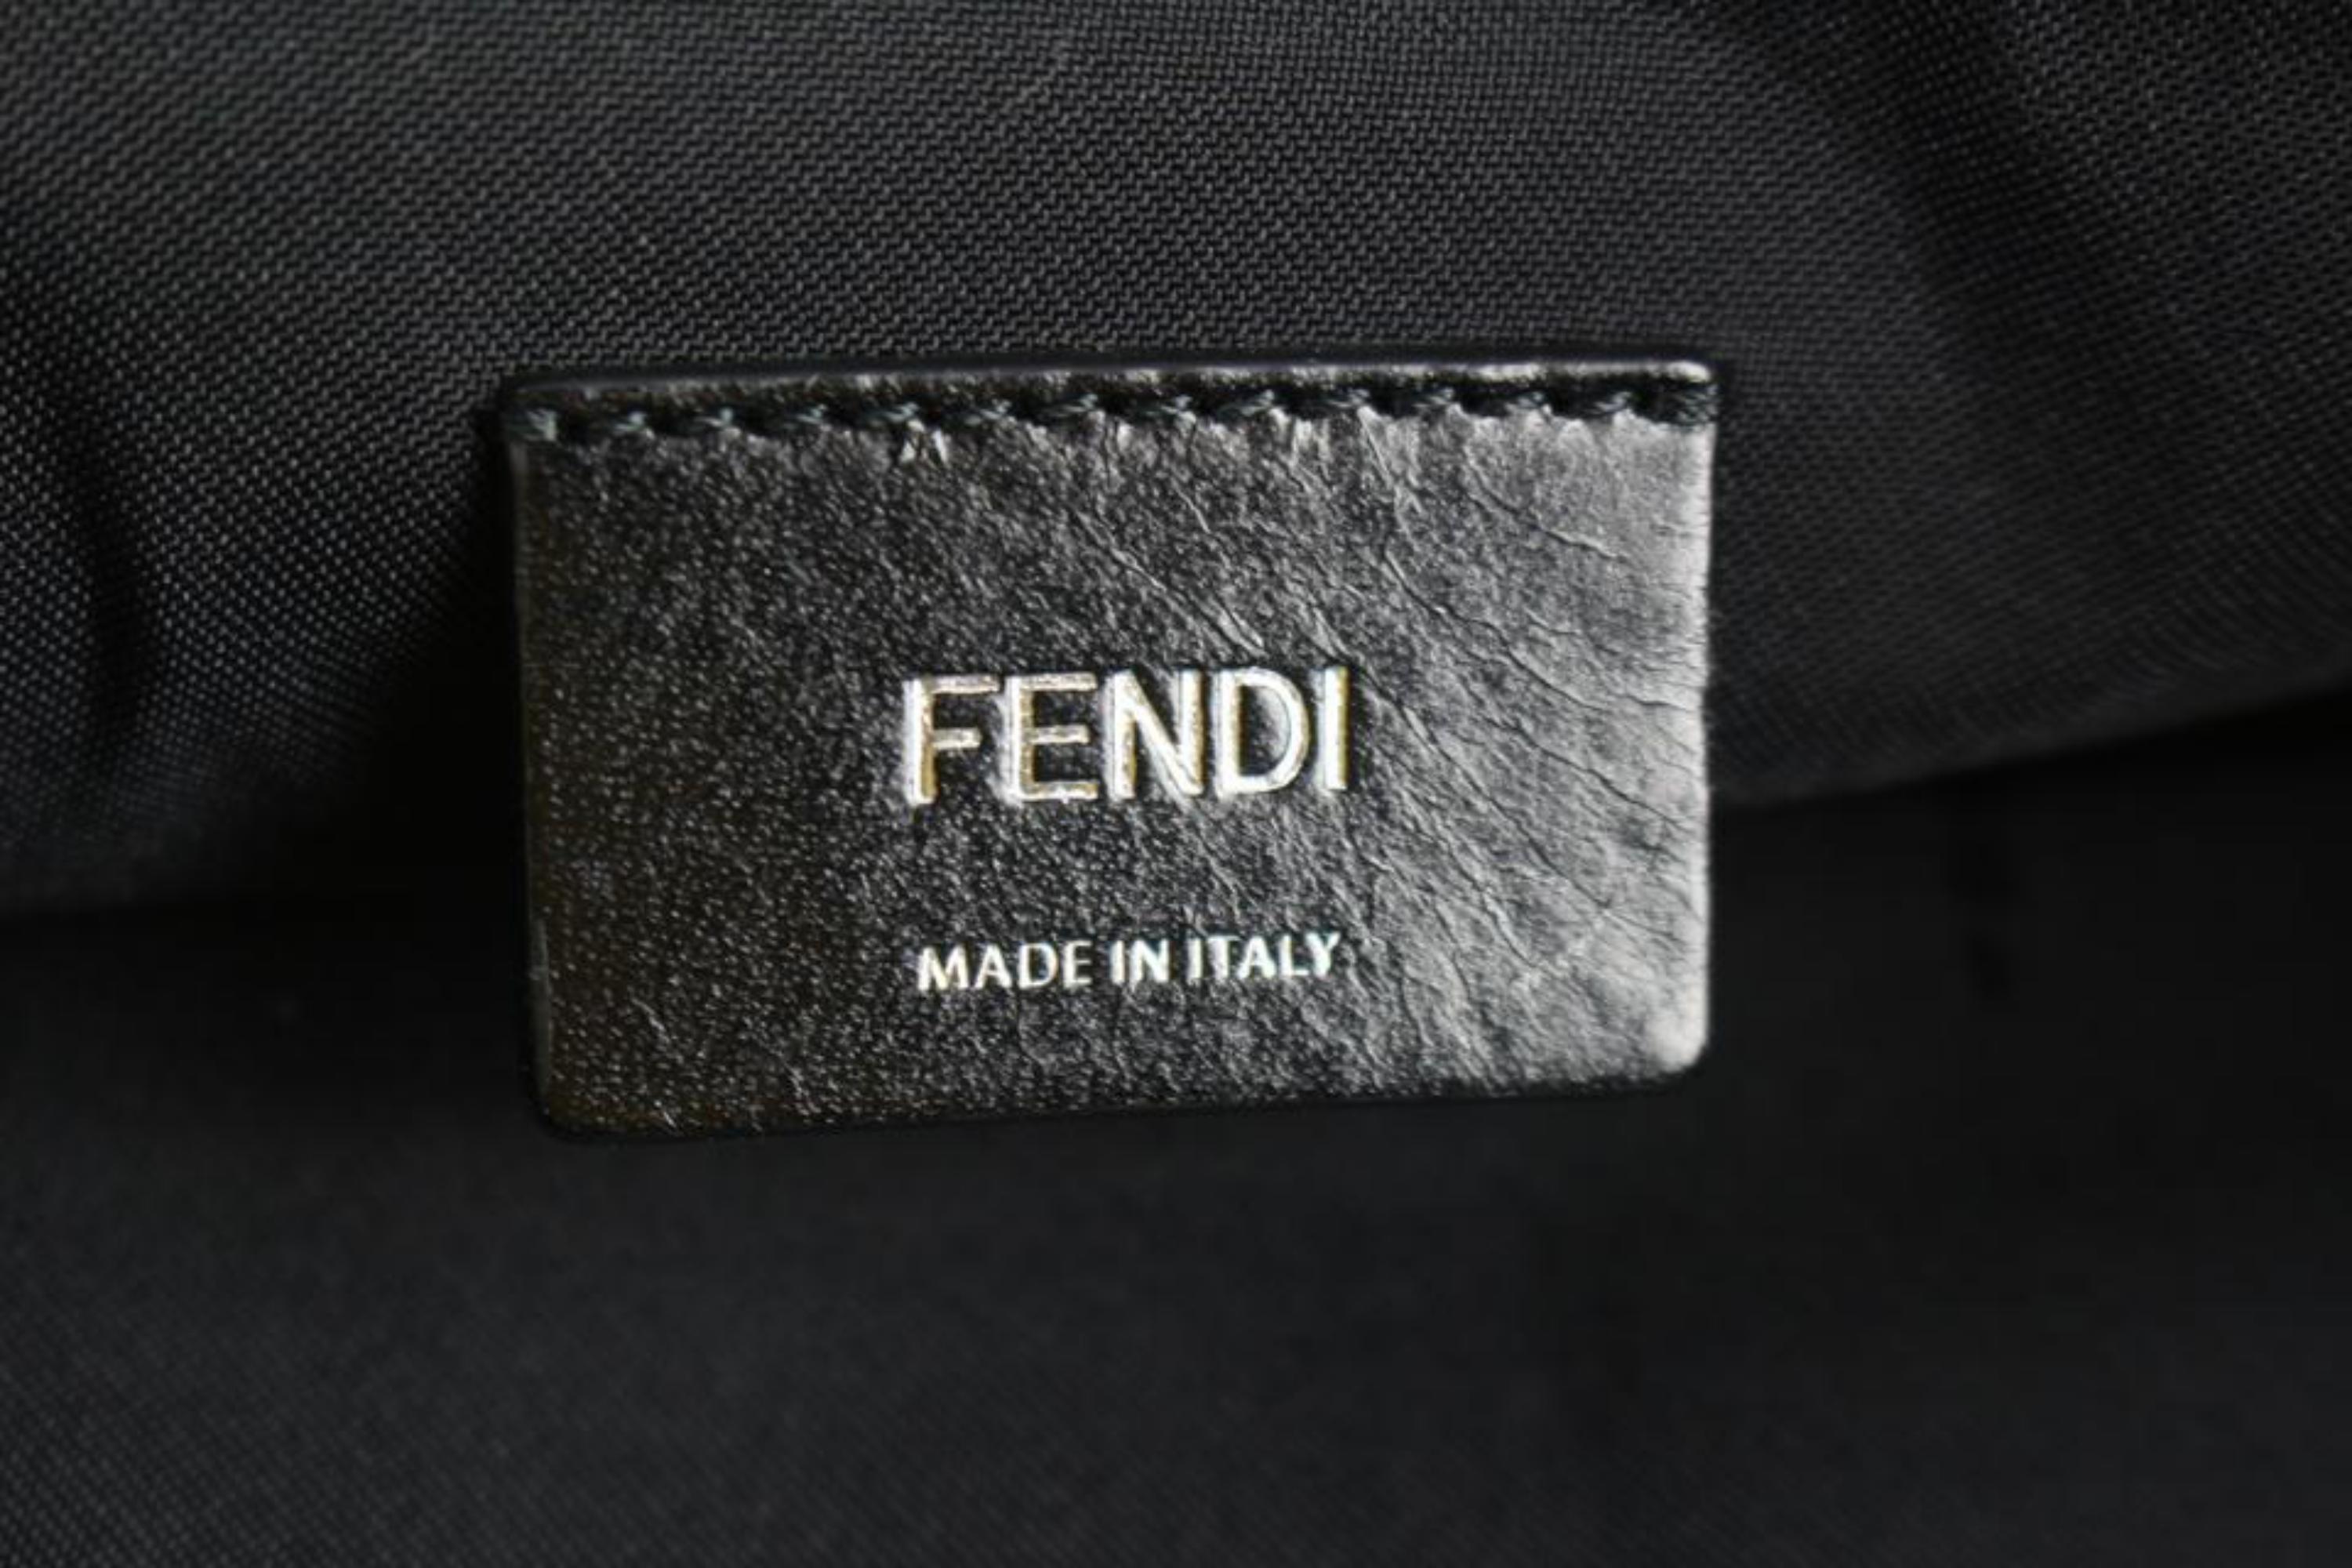 Fendi Bag Limited Monster Eyes 9fe0108 Black Nylon Tote In Good Condition For Sale In Forest Hills, NY